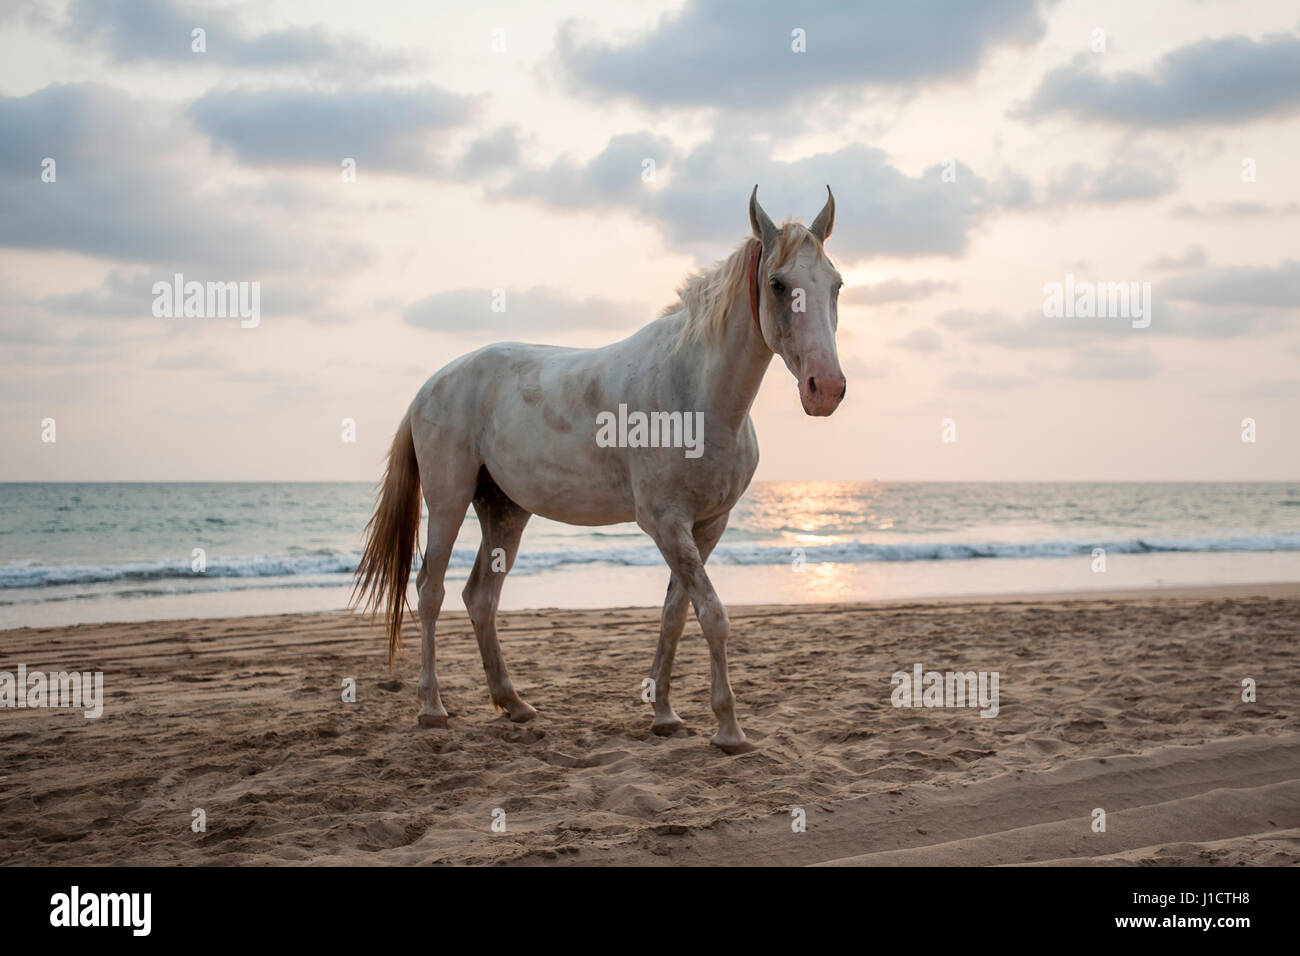 White horse at sunset, on a beach in Goa, India Stock Photo